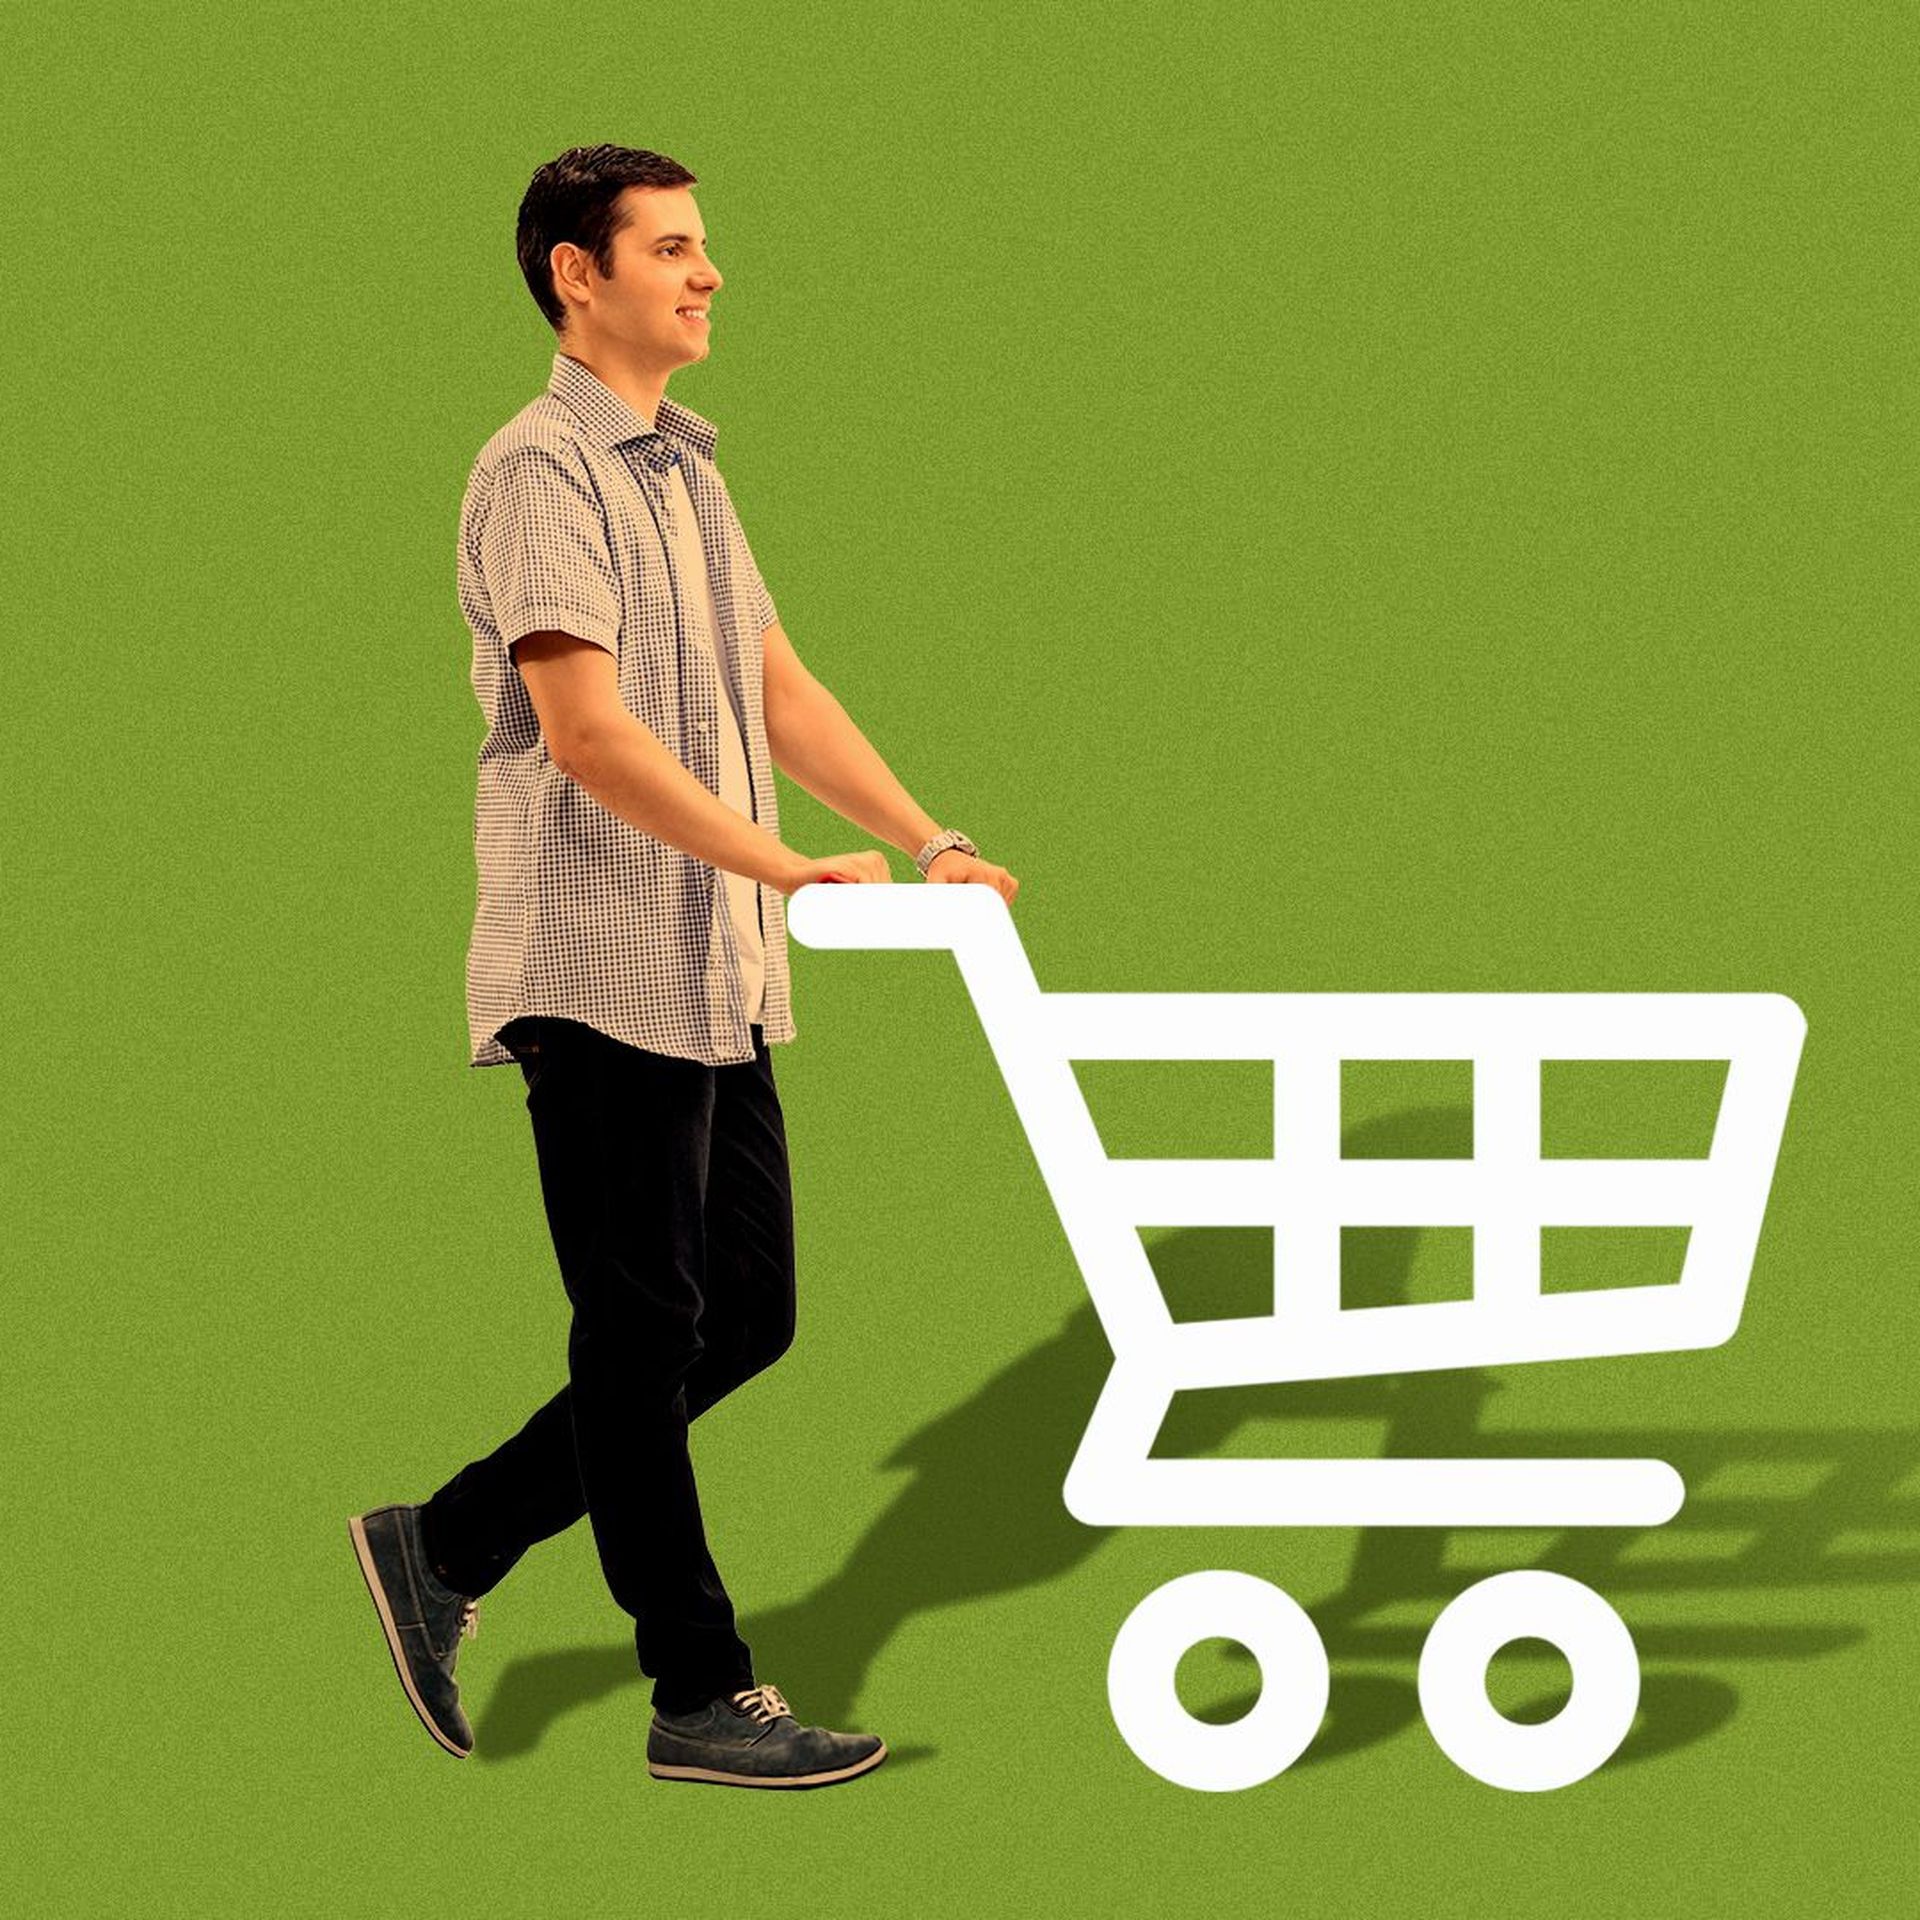 Illustration of a man pushing an online shopping cart icon